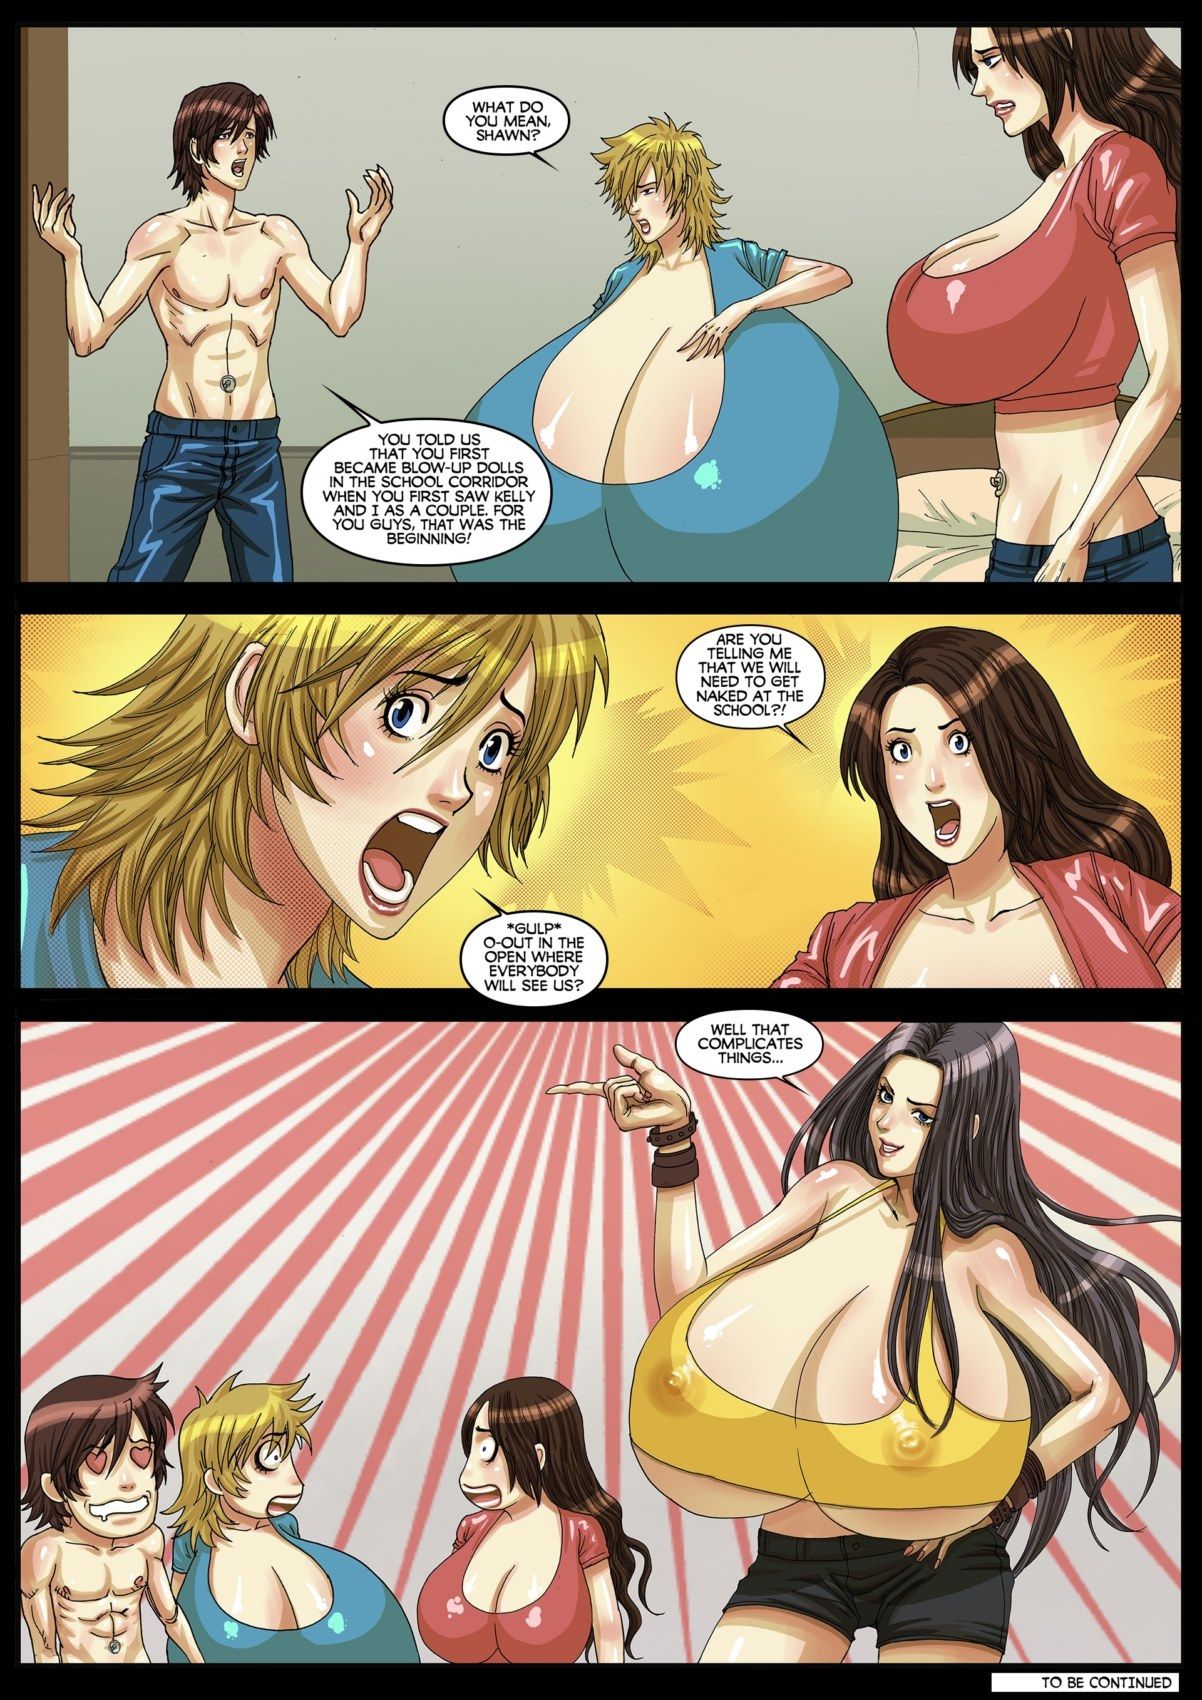 Inflated Ego Issue 4 by Frost (ExpansionFan) page 17